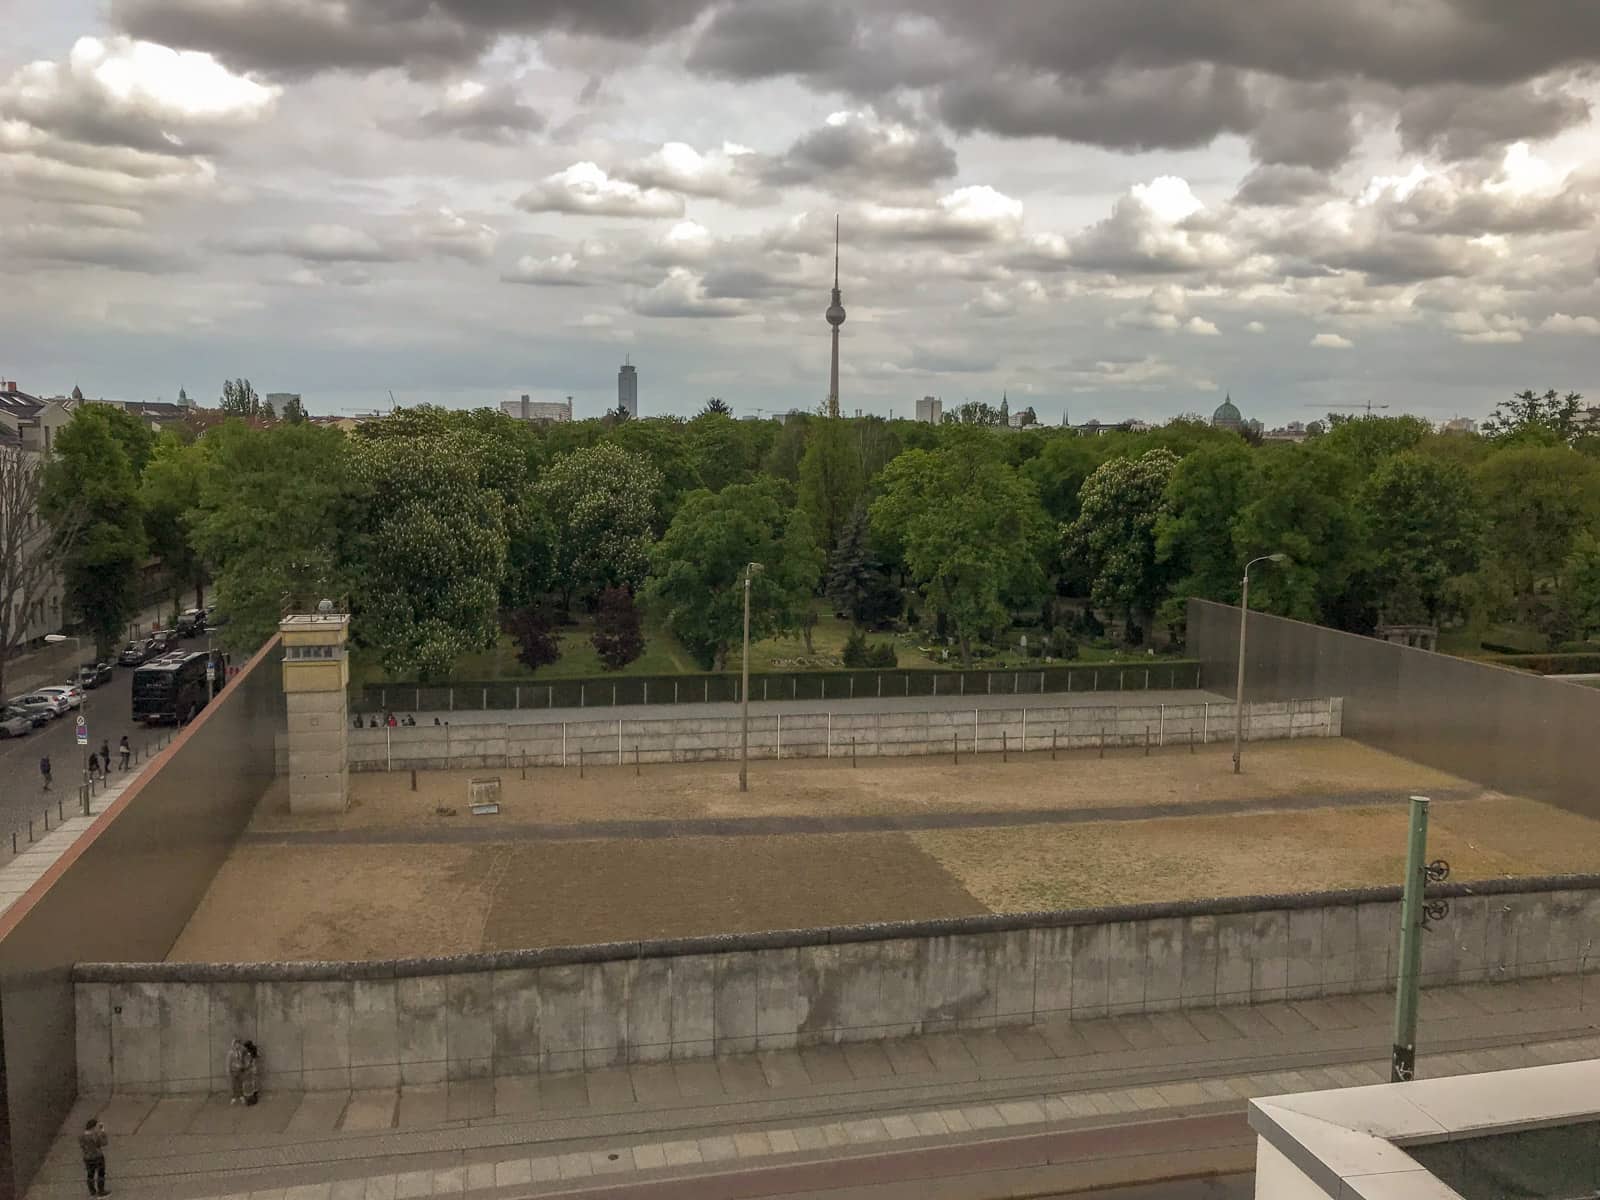 A section of the Berlin Wall and sectioned areas with wire fencing, blocked off by walls on all sides for preservation, all seen from a high vantage point.